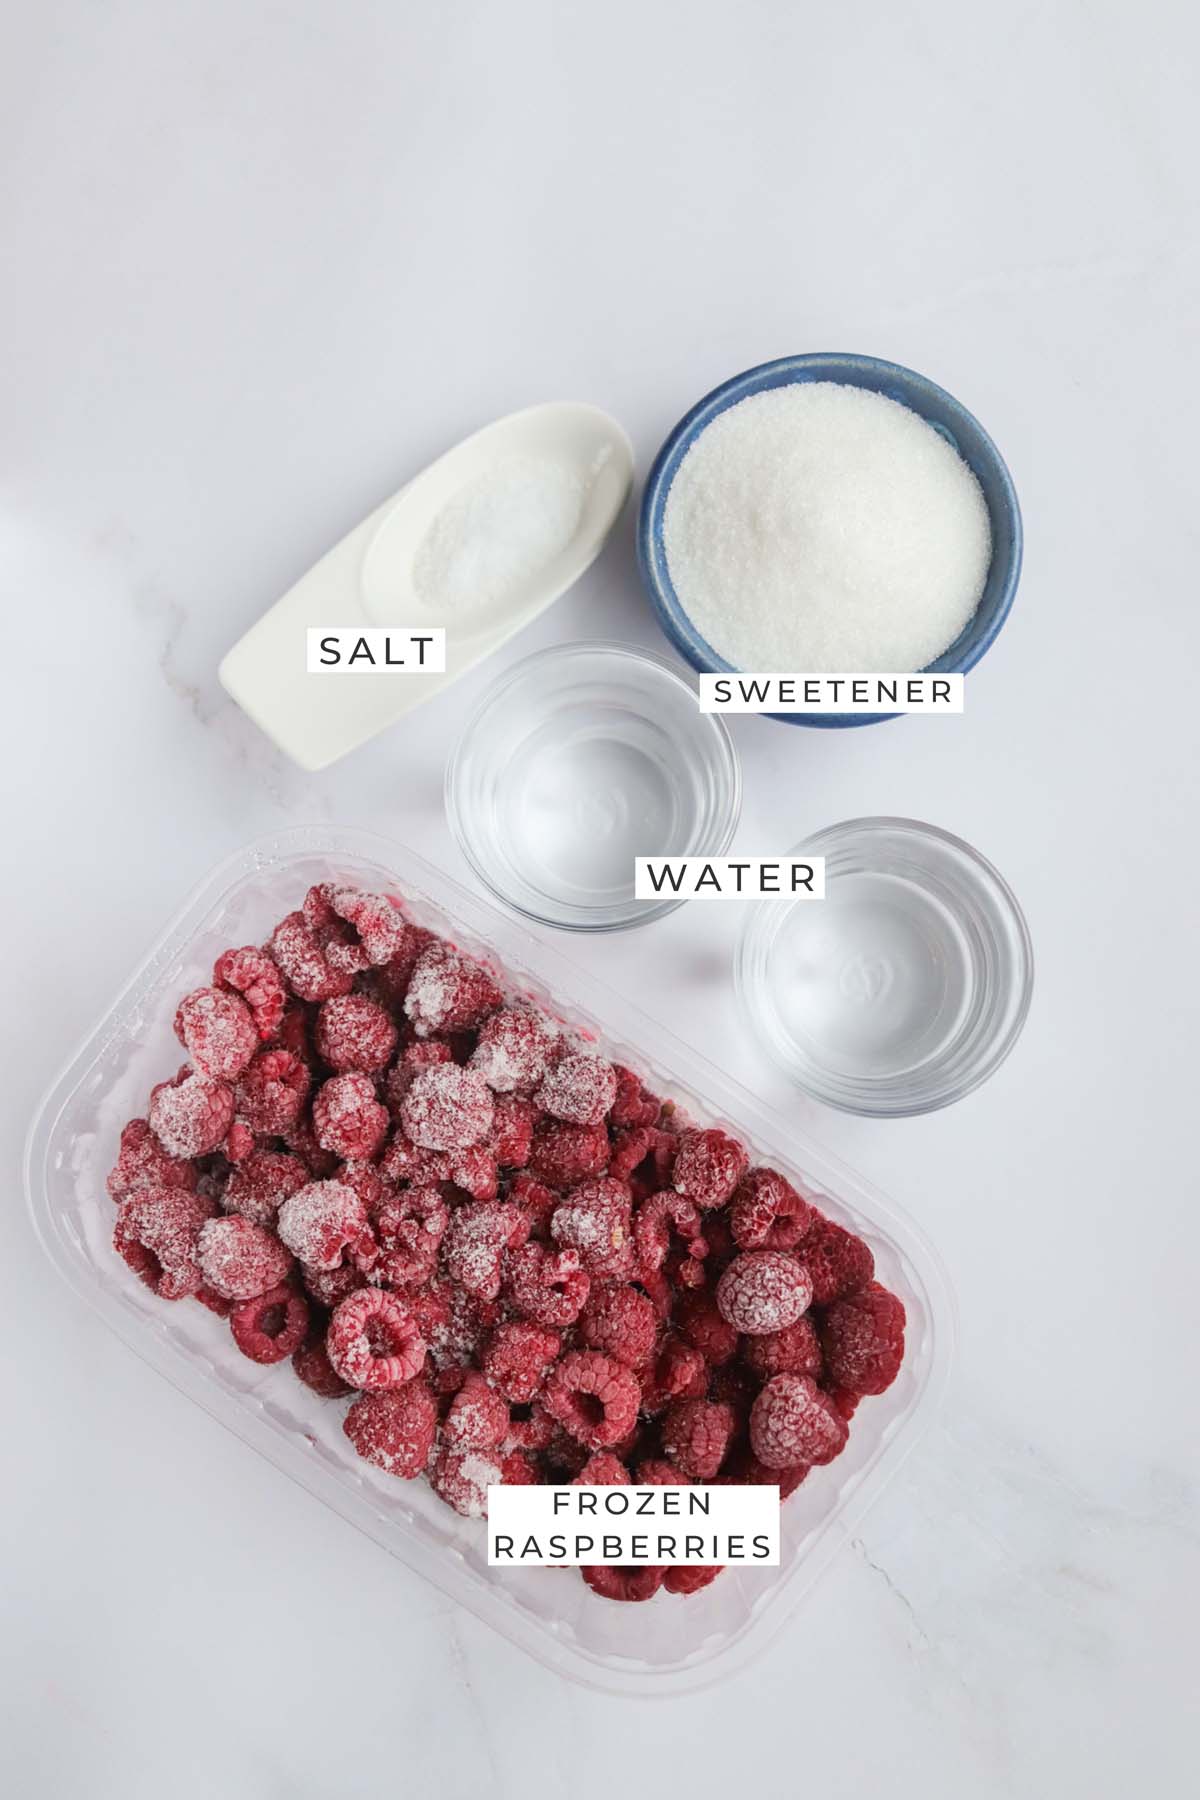 Labeled ingredients for the raspberry sorbet.